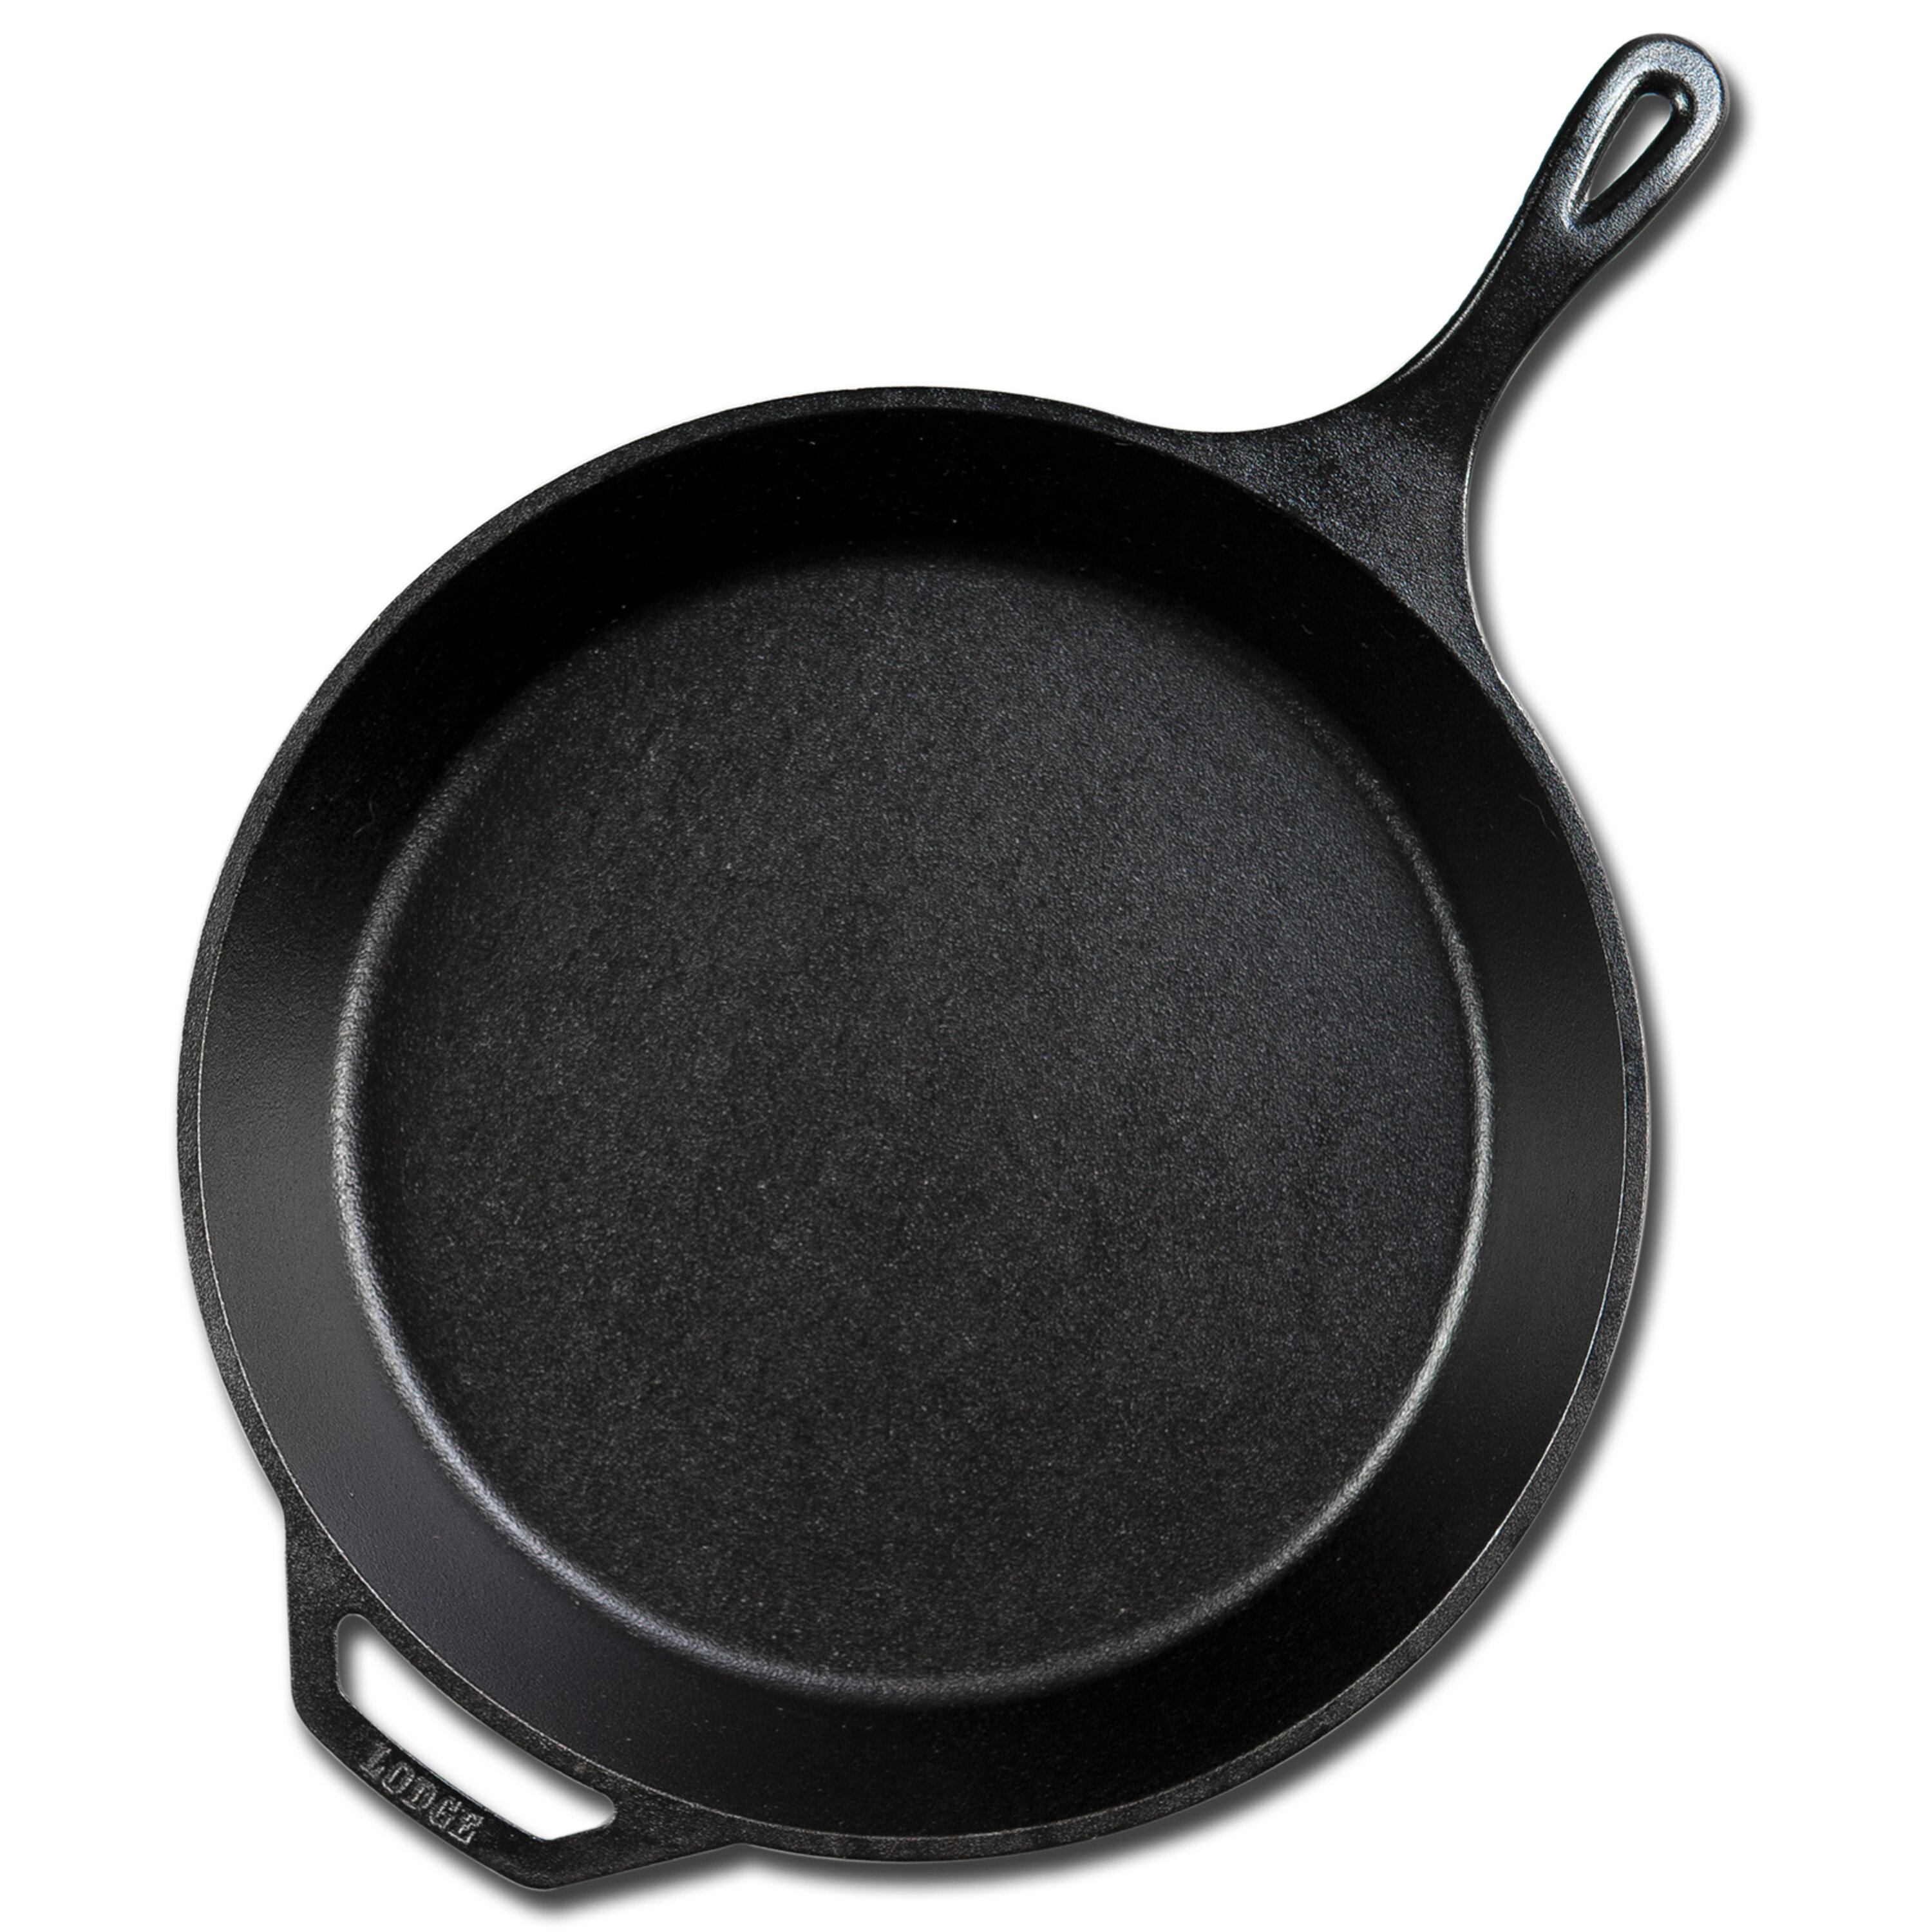 Home Kitchen Skillet Top Cooking Lodge © Black Cast Iron Frying Pan 12 in 